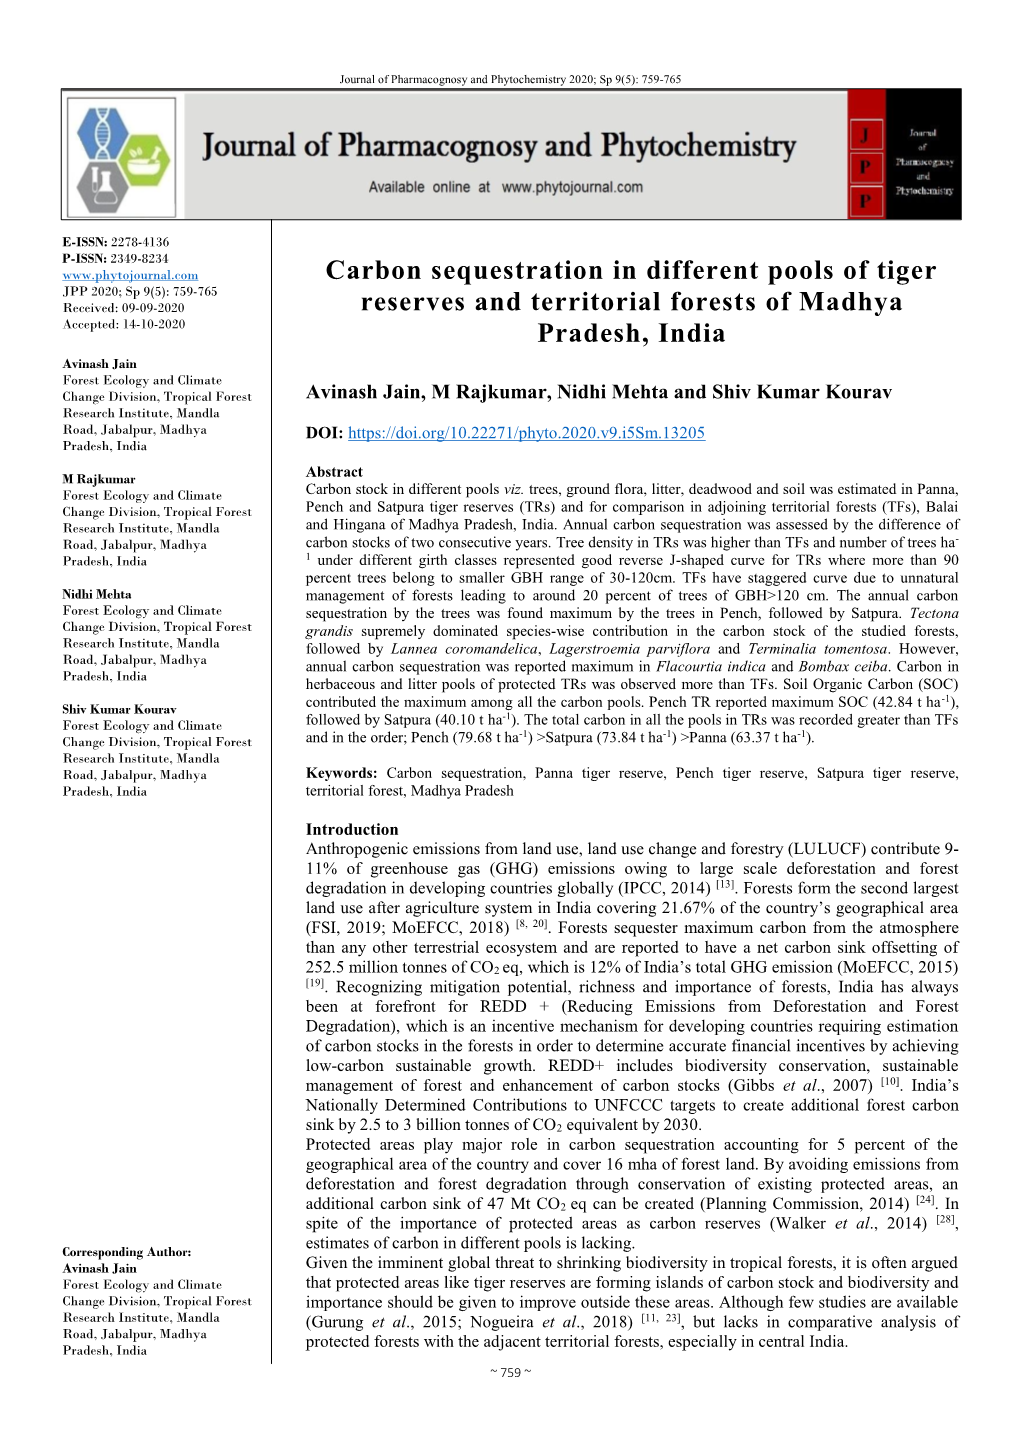 Carbon Sequestration in Different Pools of Tiger Reserves and Territorial